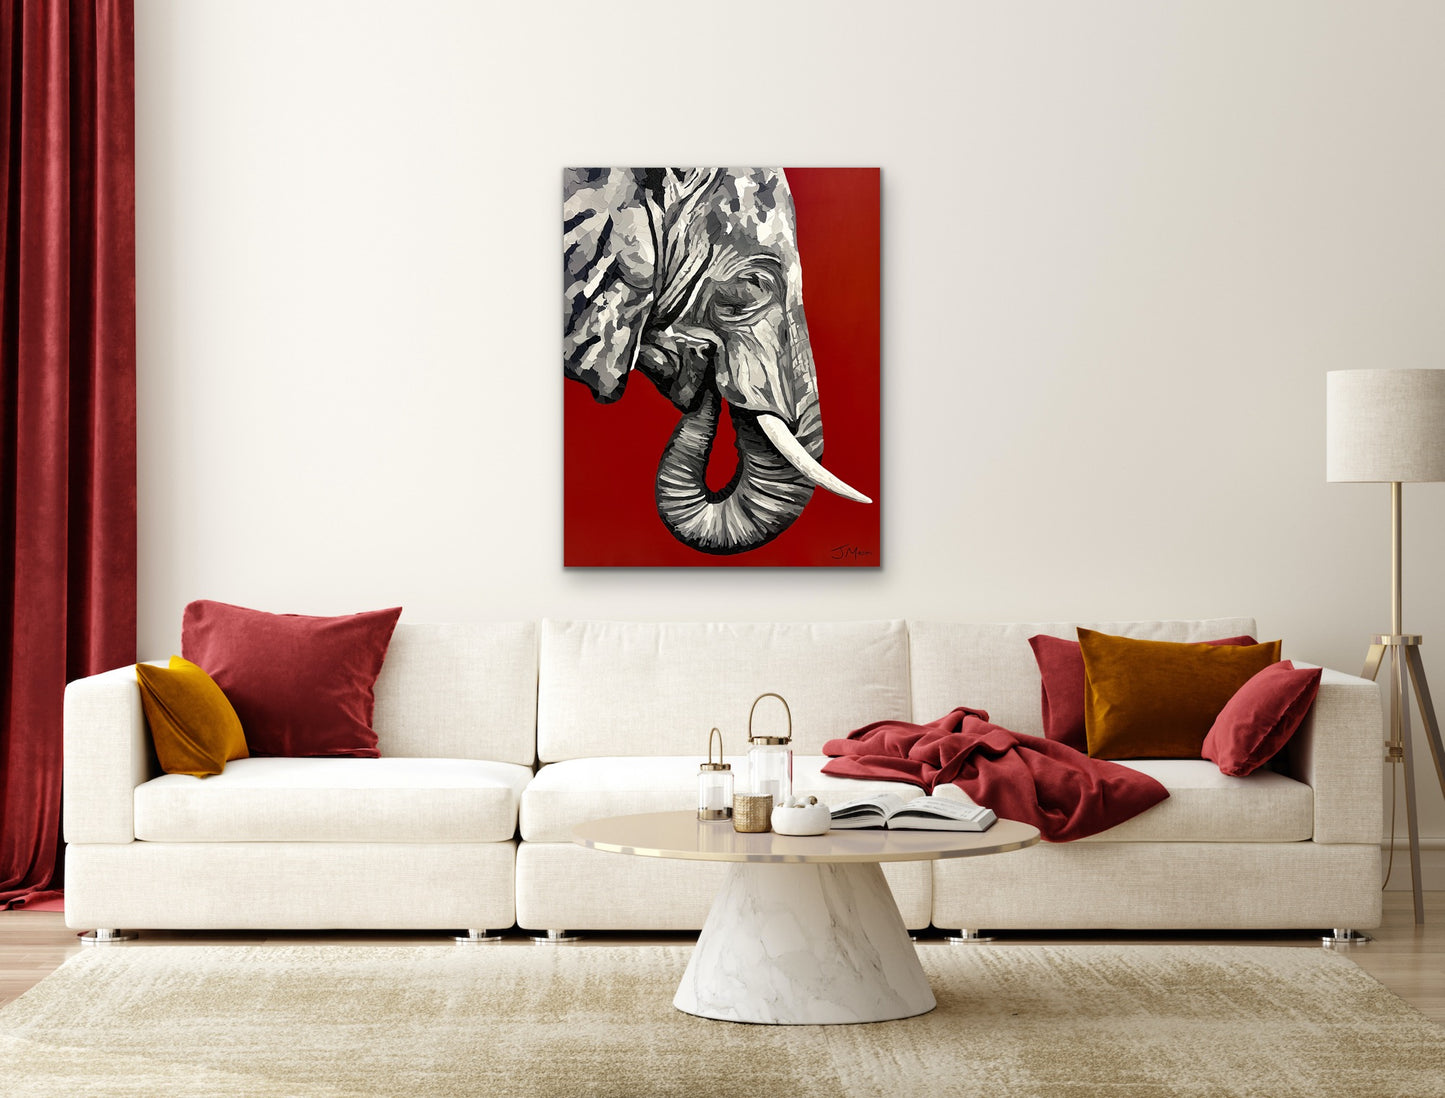 Elephant in Red - 100x80cm